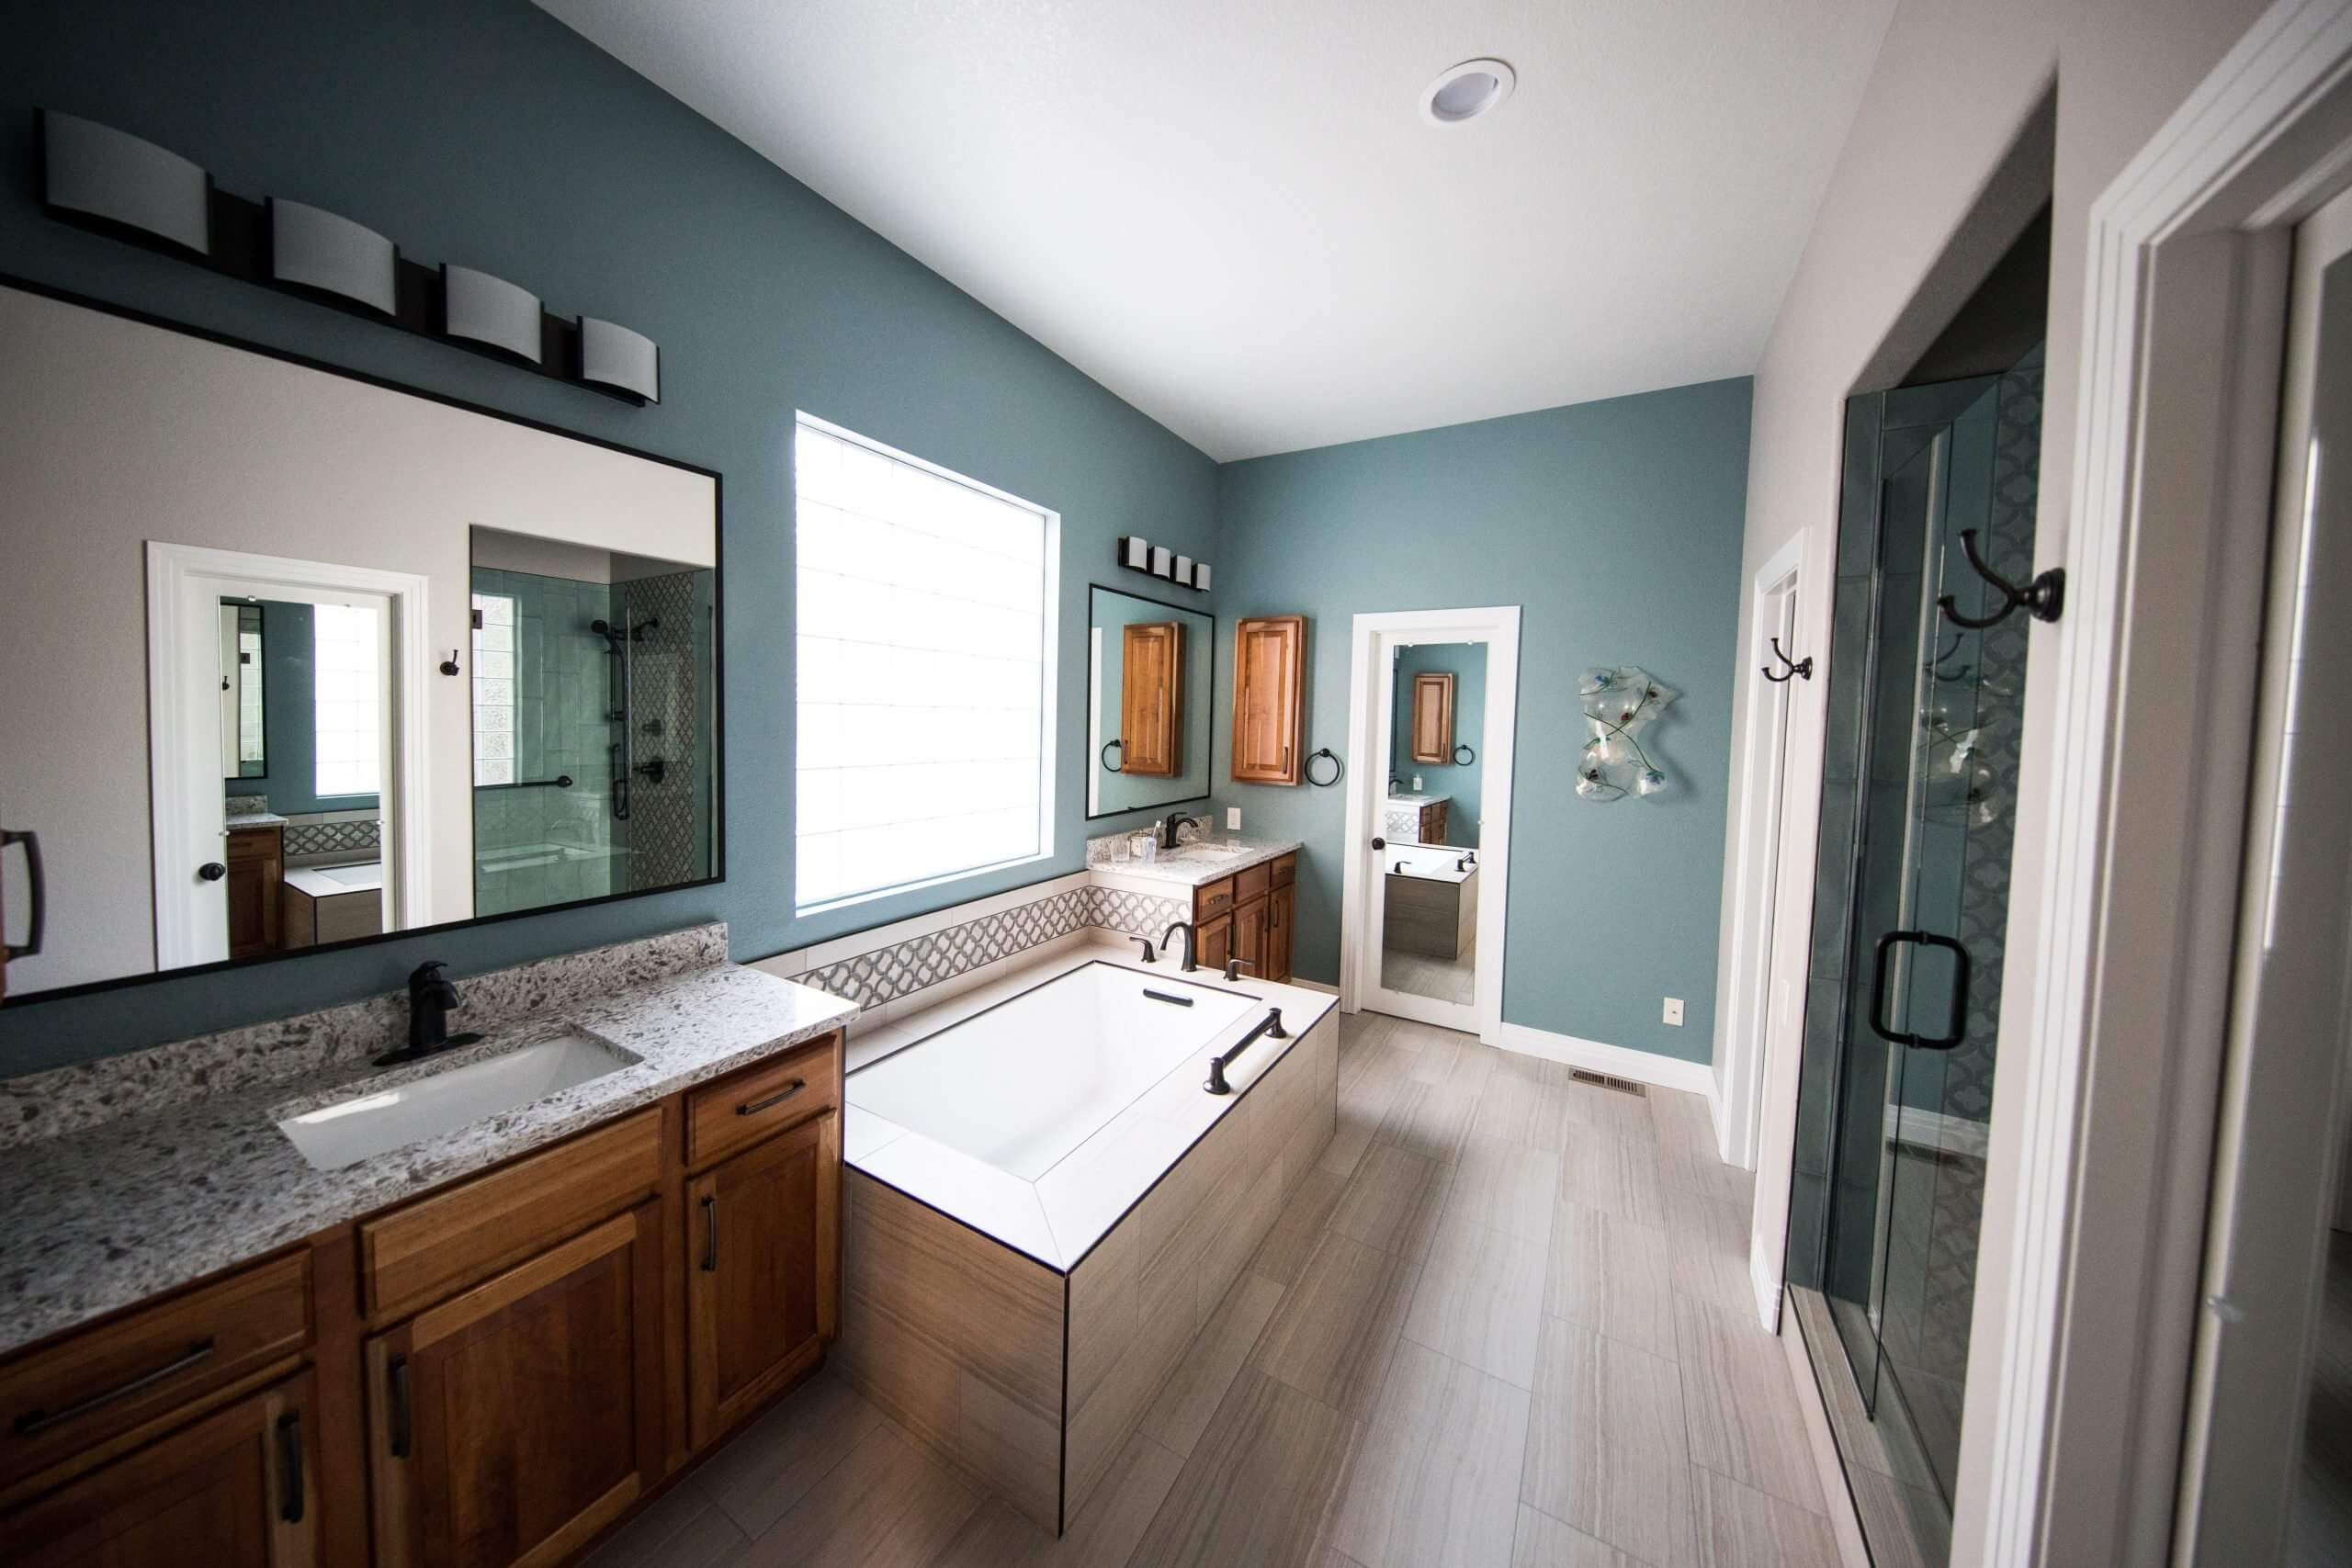 A bathroom with a large tub and wooden cabinets.